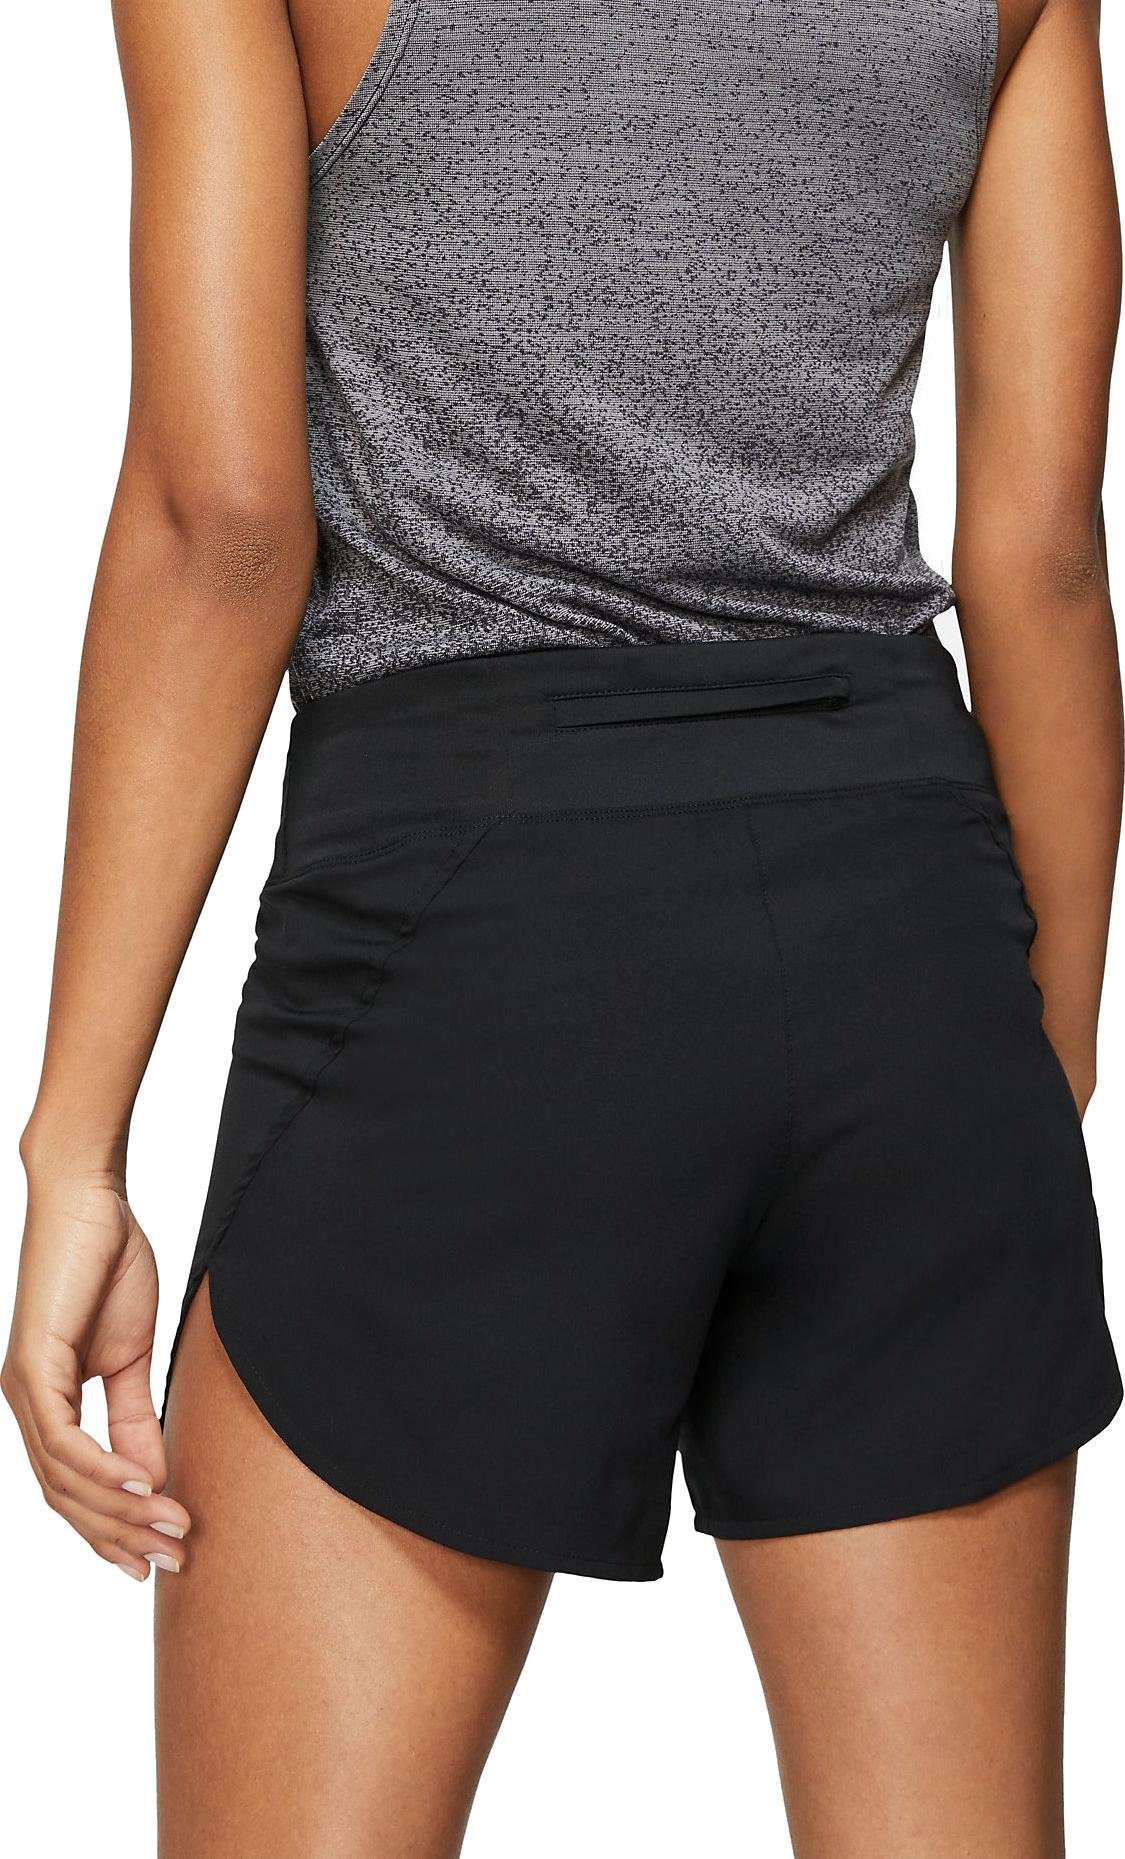 nike running eclipse 5in shorts in black